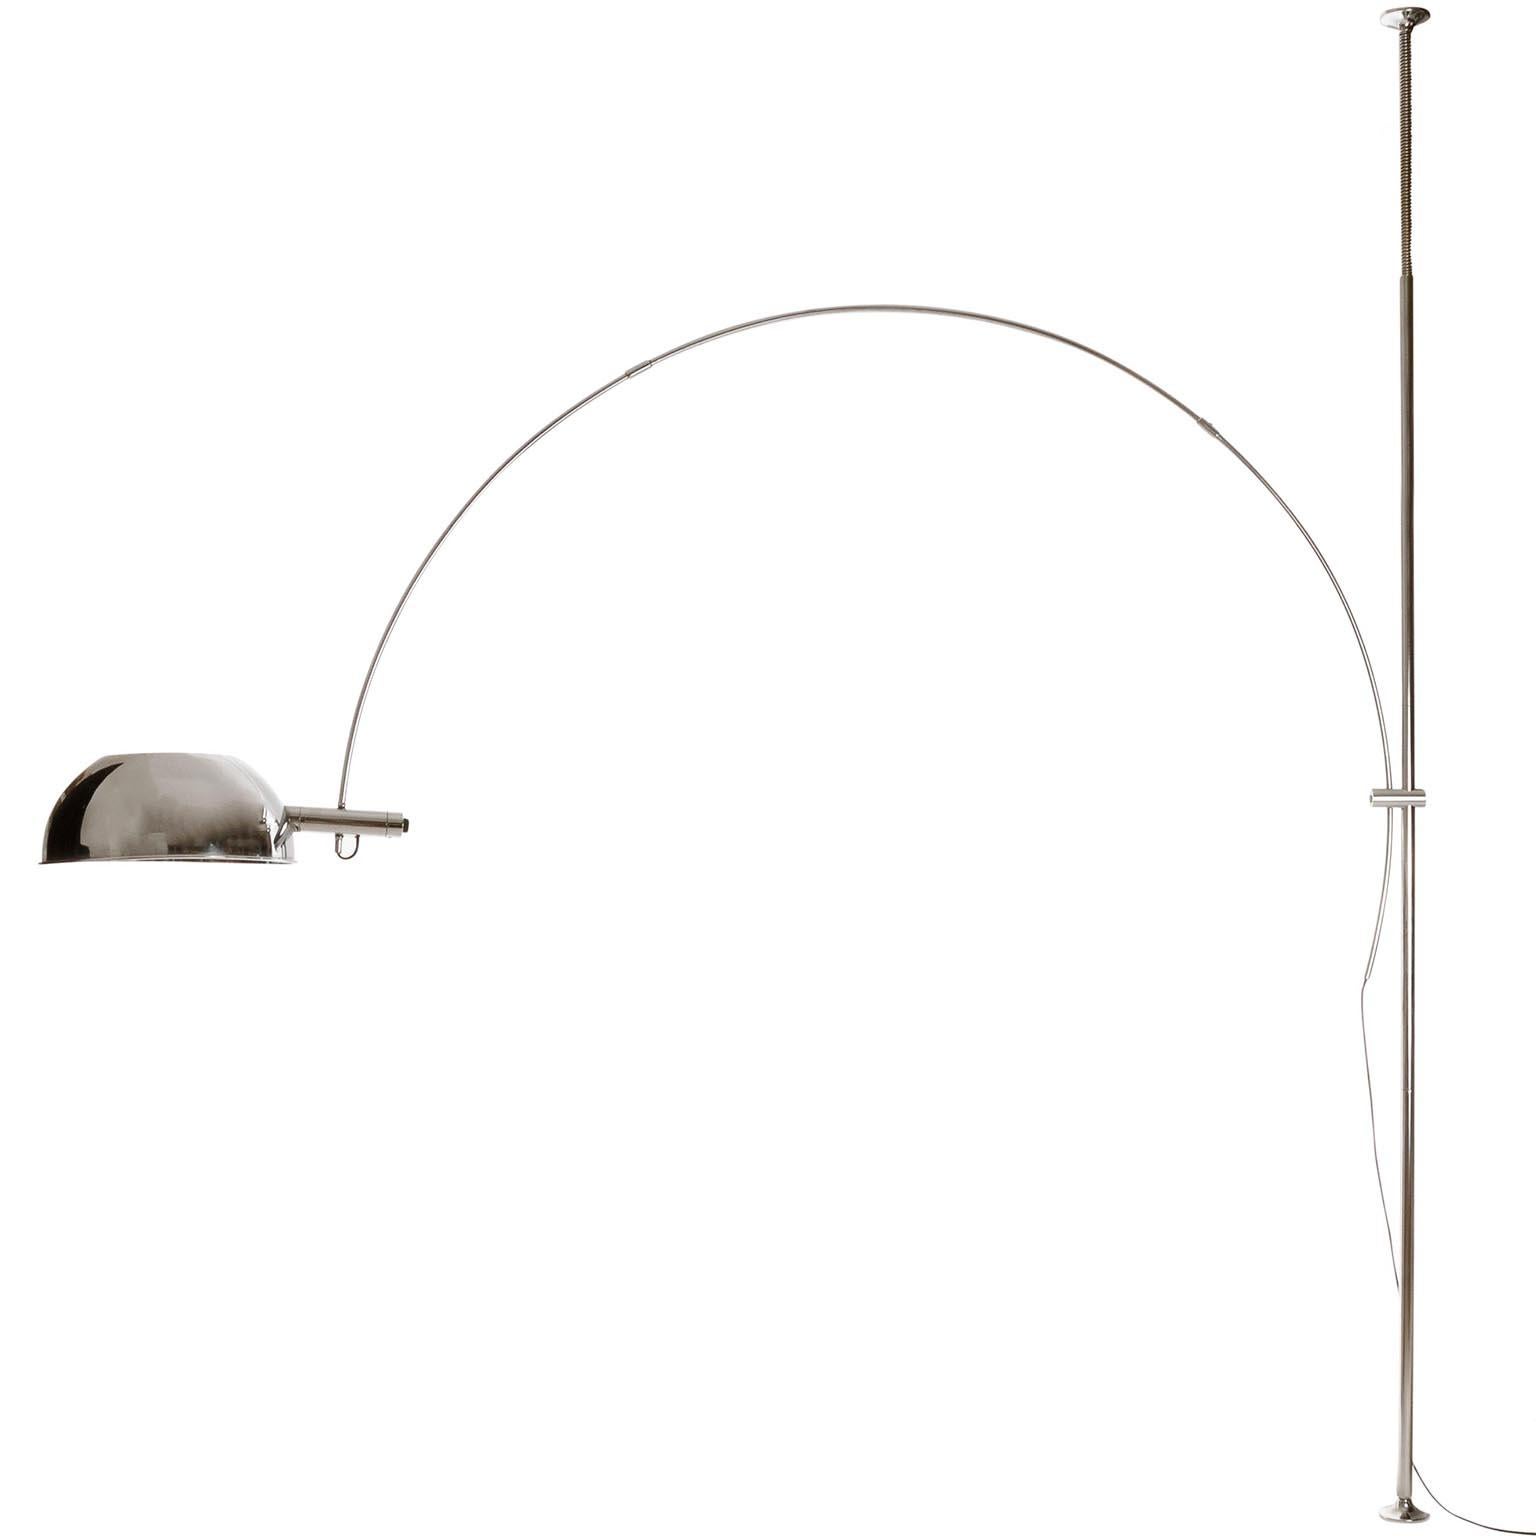 A ceiling to floor lamp by Florian Schulz, Germany, manufactured in midcentury, circa 1970 (late 1960s or early 1970s).
It is made of polished nickel plated brass and metal. The inner side of the lampshade is brushed.
The fixture is clamped between